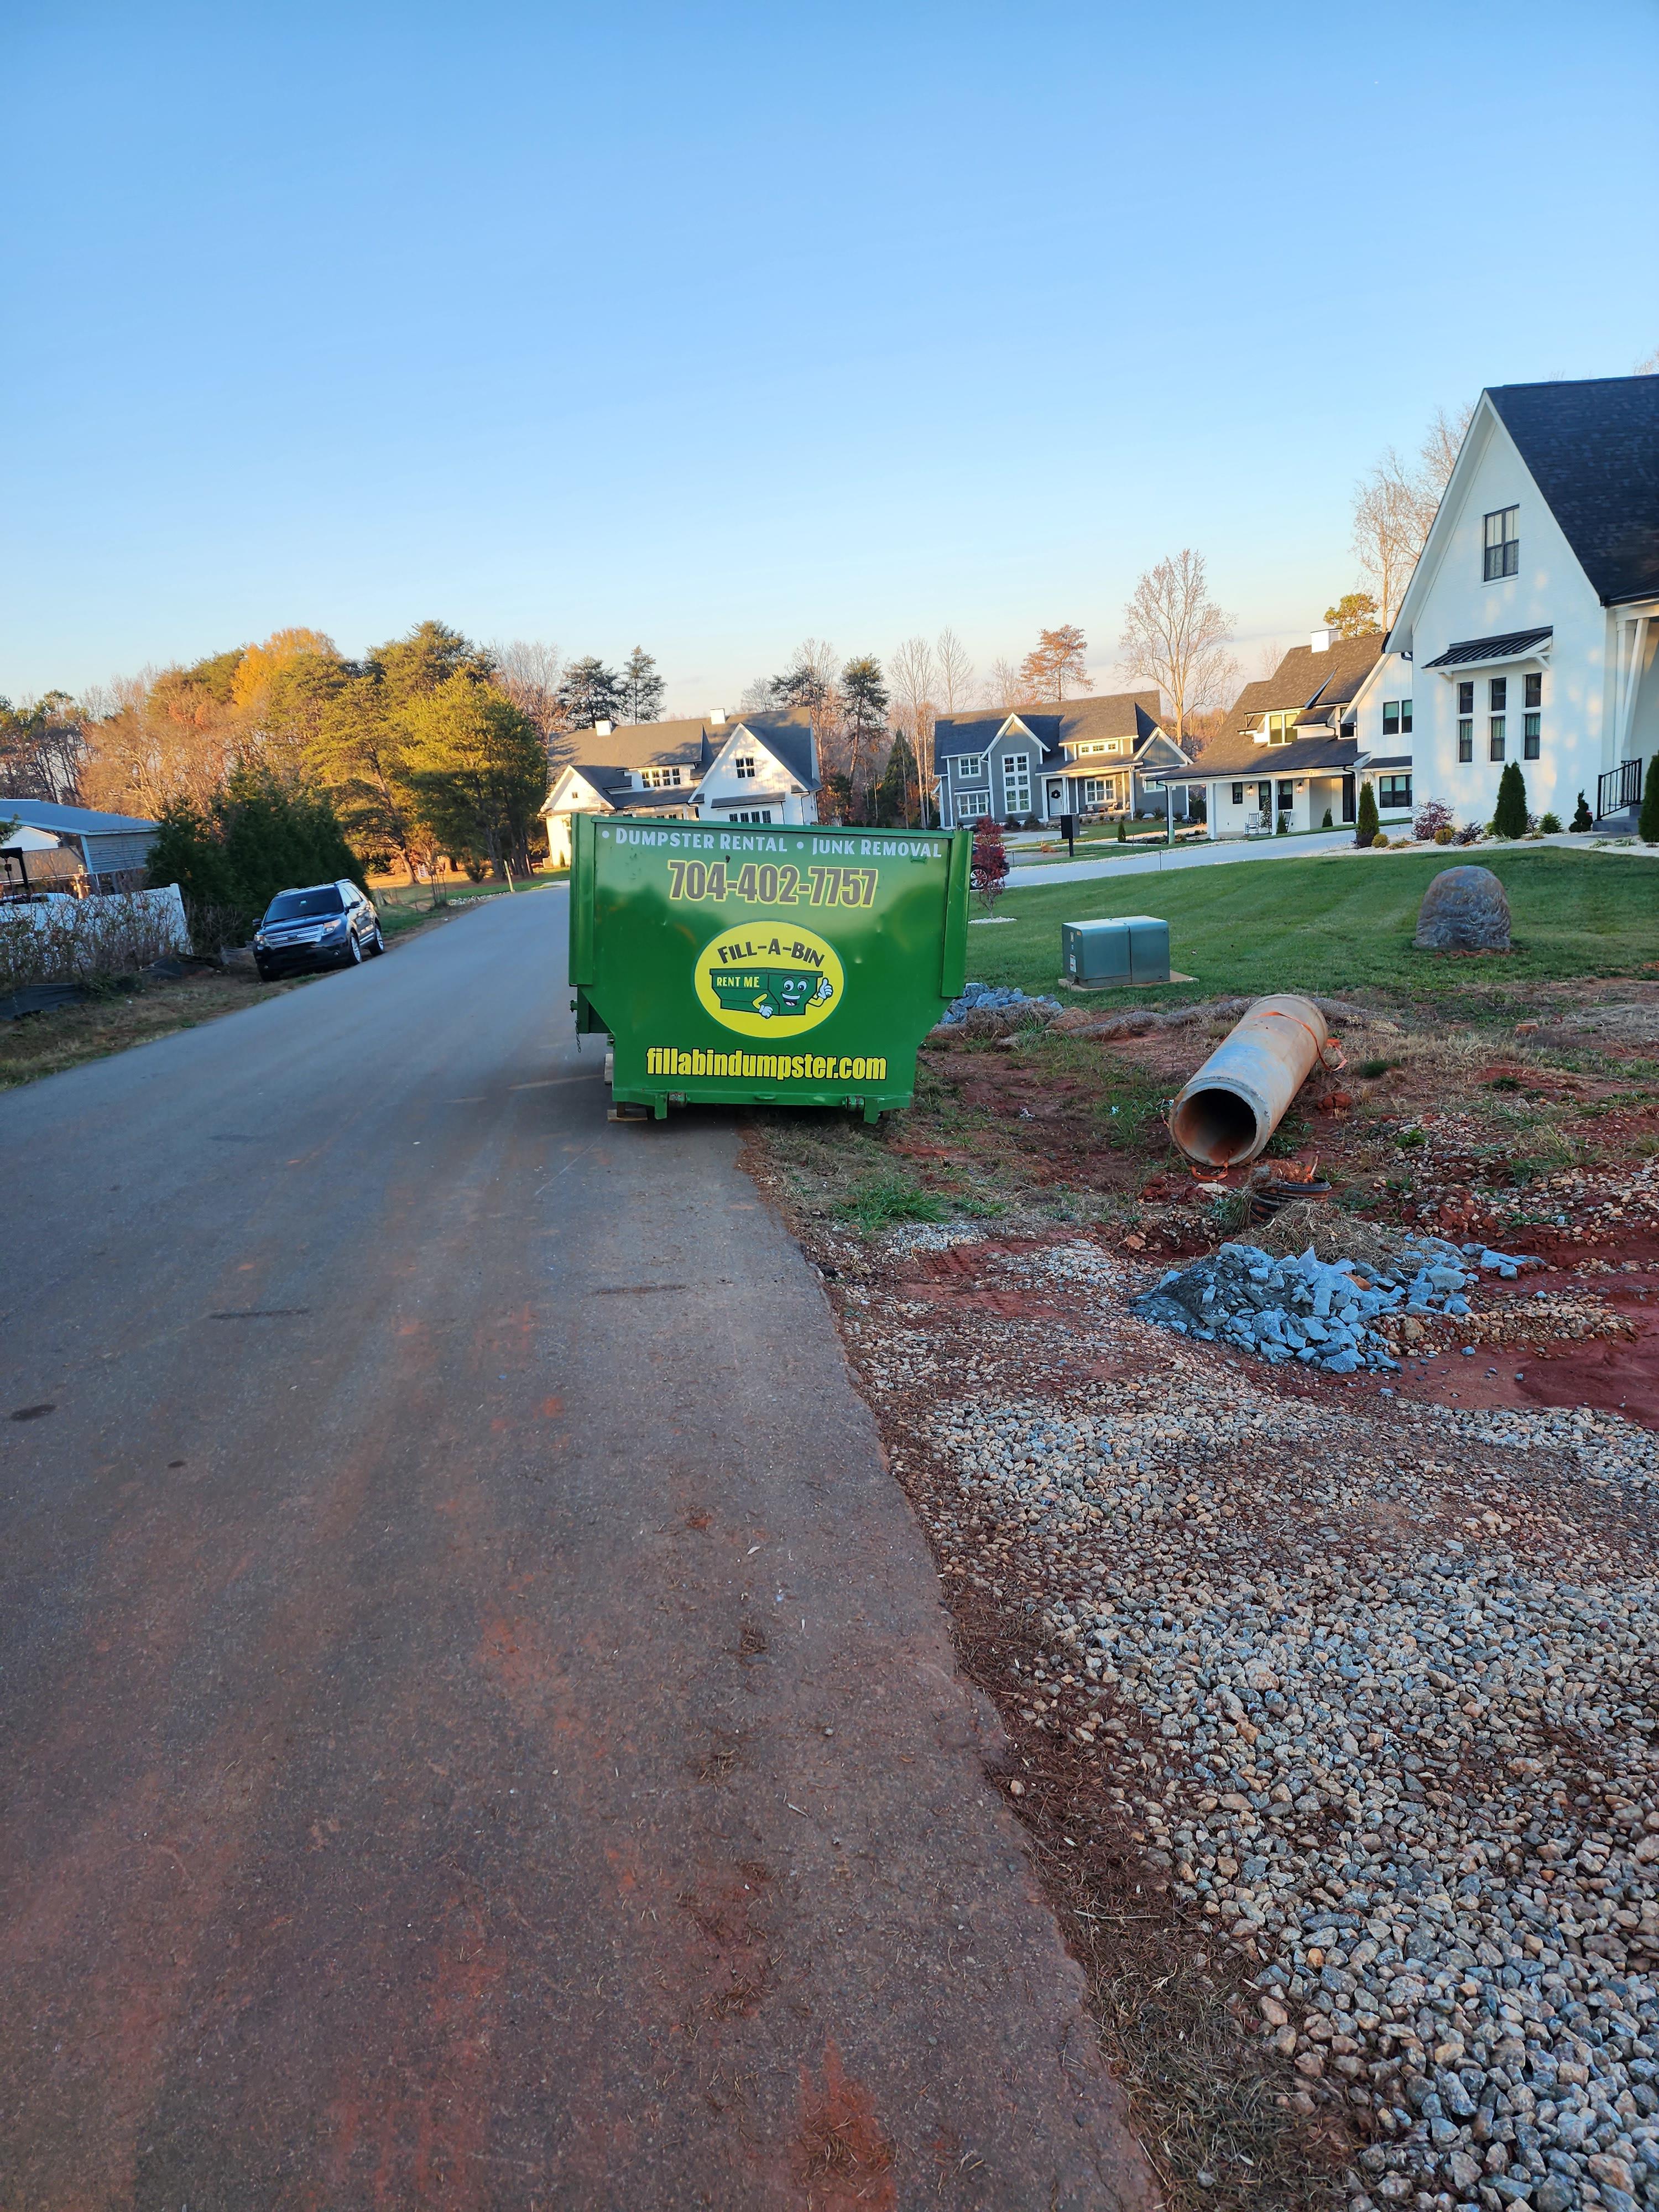 In Statesville, NC, our local dumpster removal services are the key to simplifying your waste management needs. We understand the importance of convenience and efficiency, which is why we offer timely and hassle-free dumpster removal right here in your community. Whether it's a home cleanout, construction project, or commercial debris removal, we've got the right-sized dumpster for your specific needs. Our experienced team is dedicated to serving Statesville residents and businesses, and we take pride in our commitment to responsible waste disposal. With competitive rates and a focus on customer satisfaction, we're your trusted local partner for prompt and reliable dumpster removal services. Choose us, and experience the ease and peace of mind that comes with a clutter-free space in Statesville, NC.